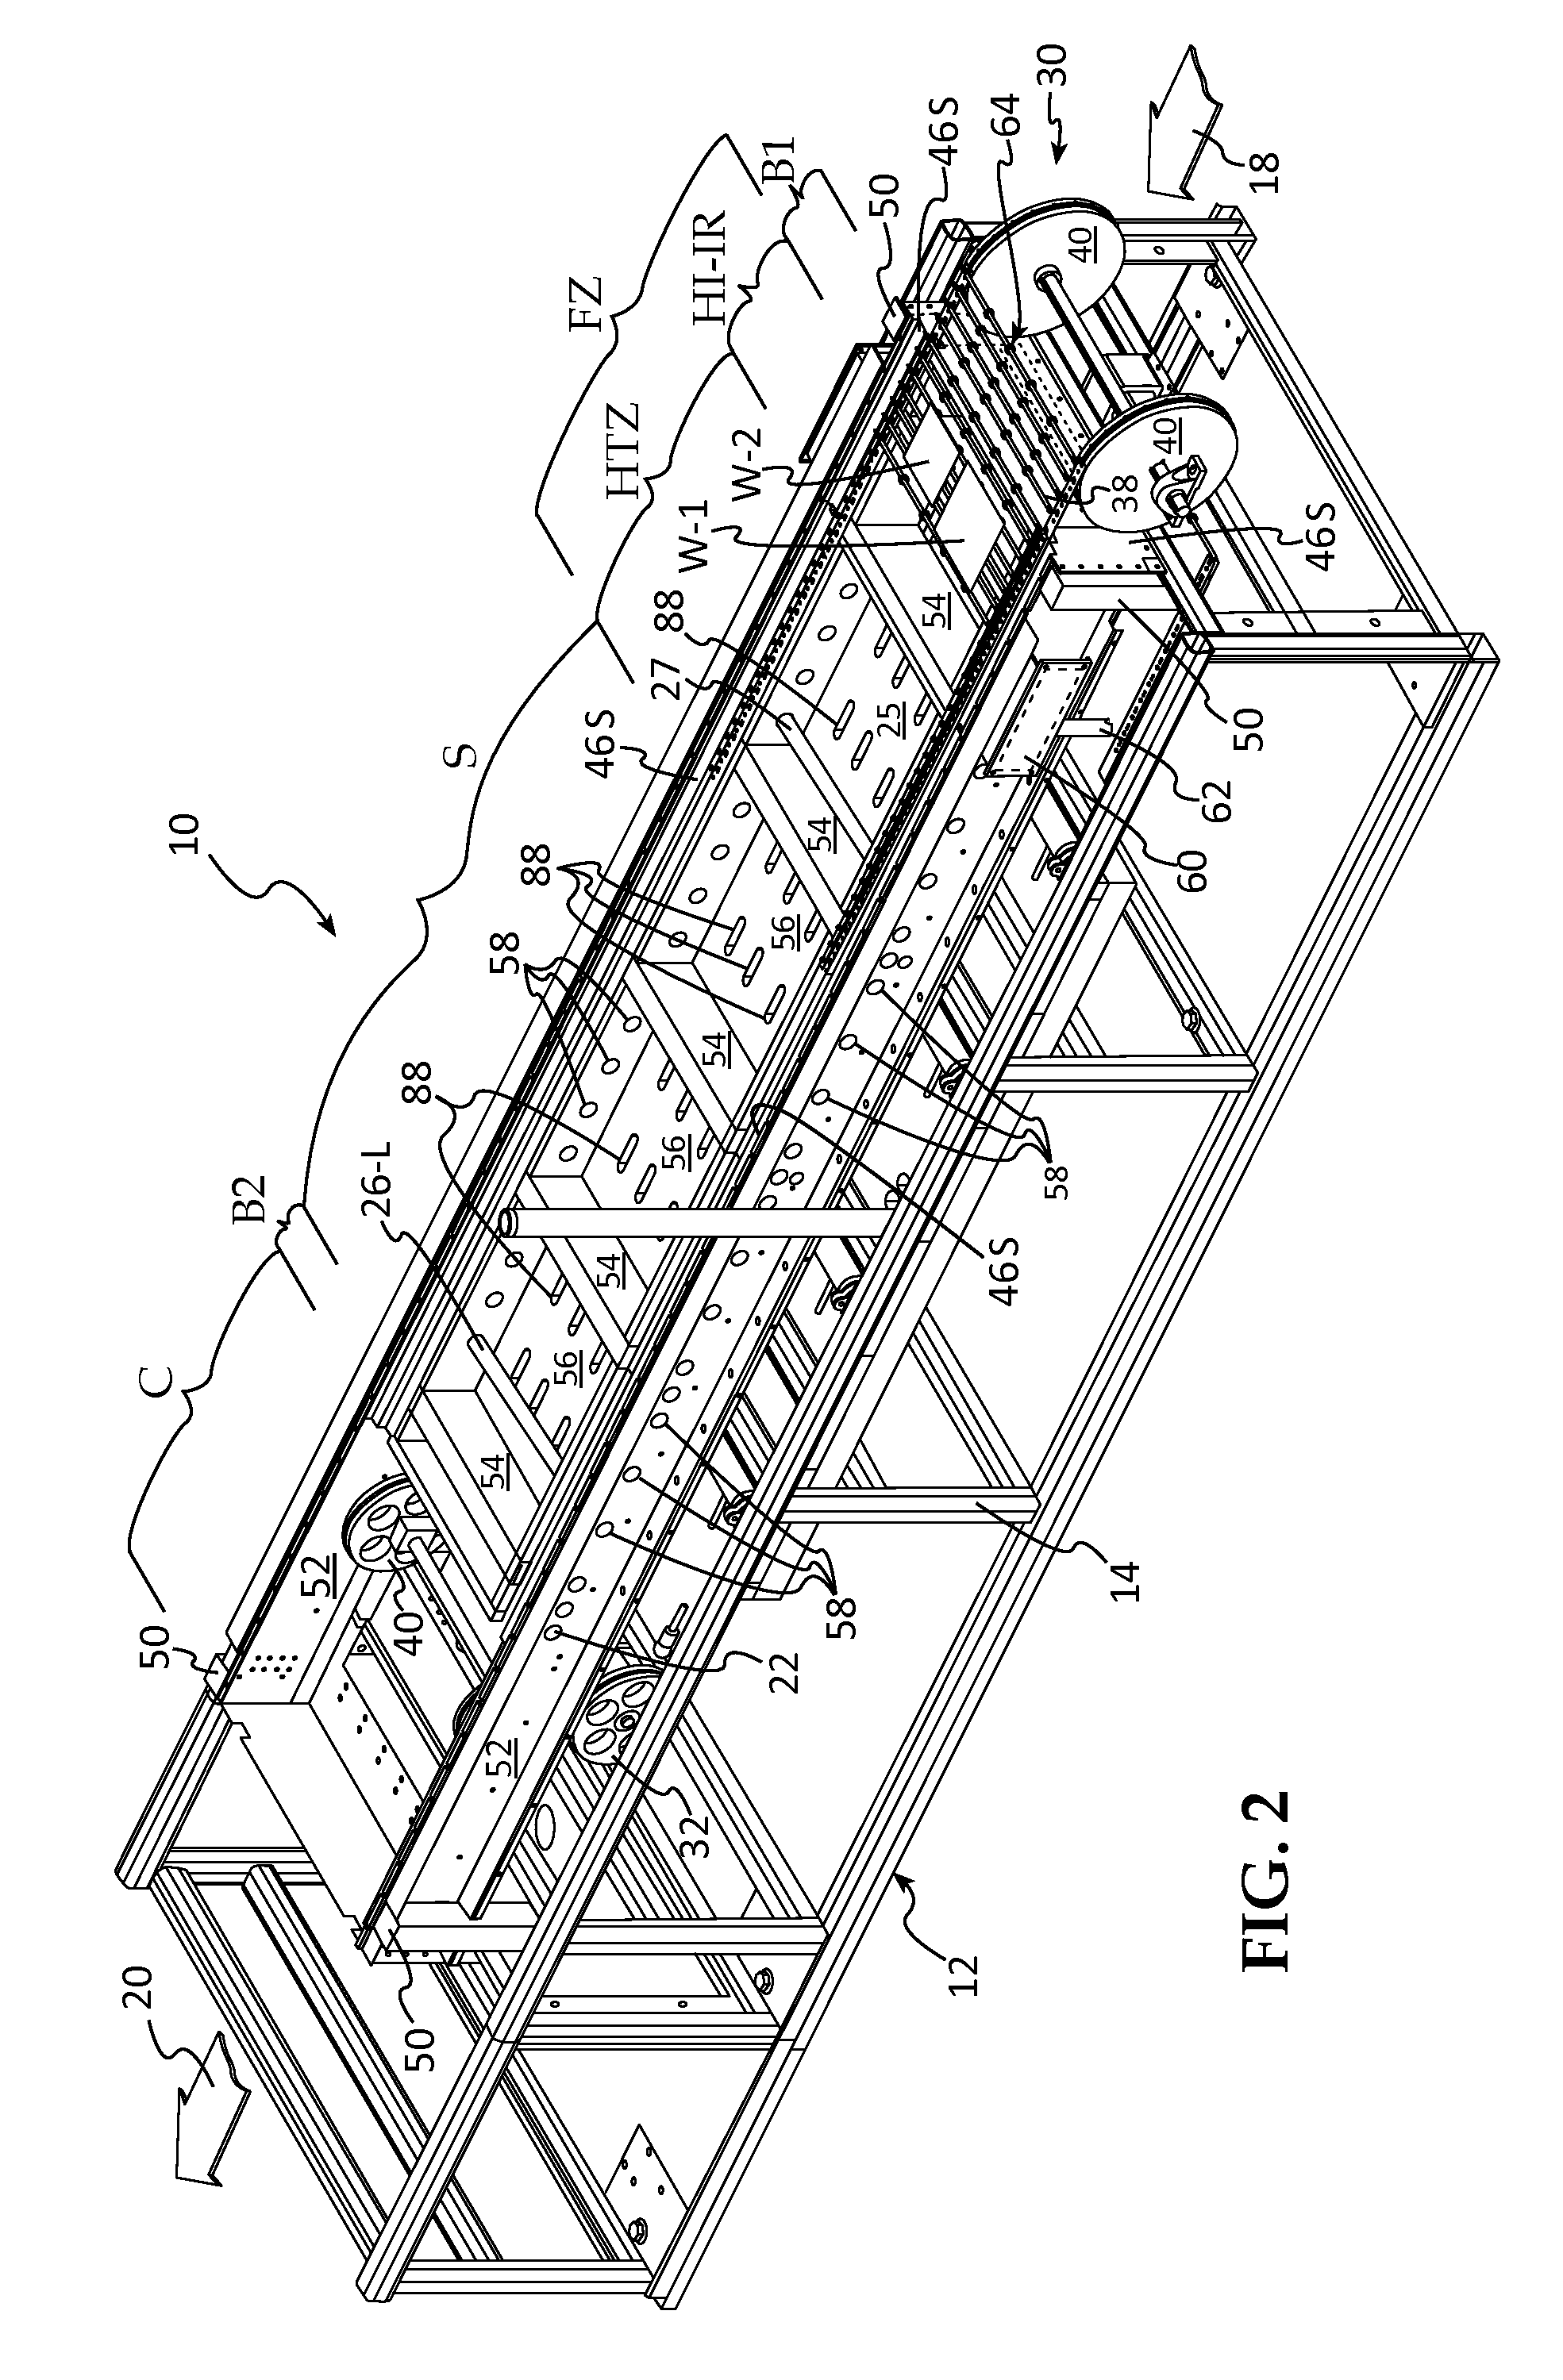 Diffusion Furnaces Employing Ultra Low Mass Transport Systems and Methods of Wafer Rapid Diffusion Processing